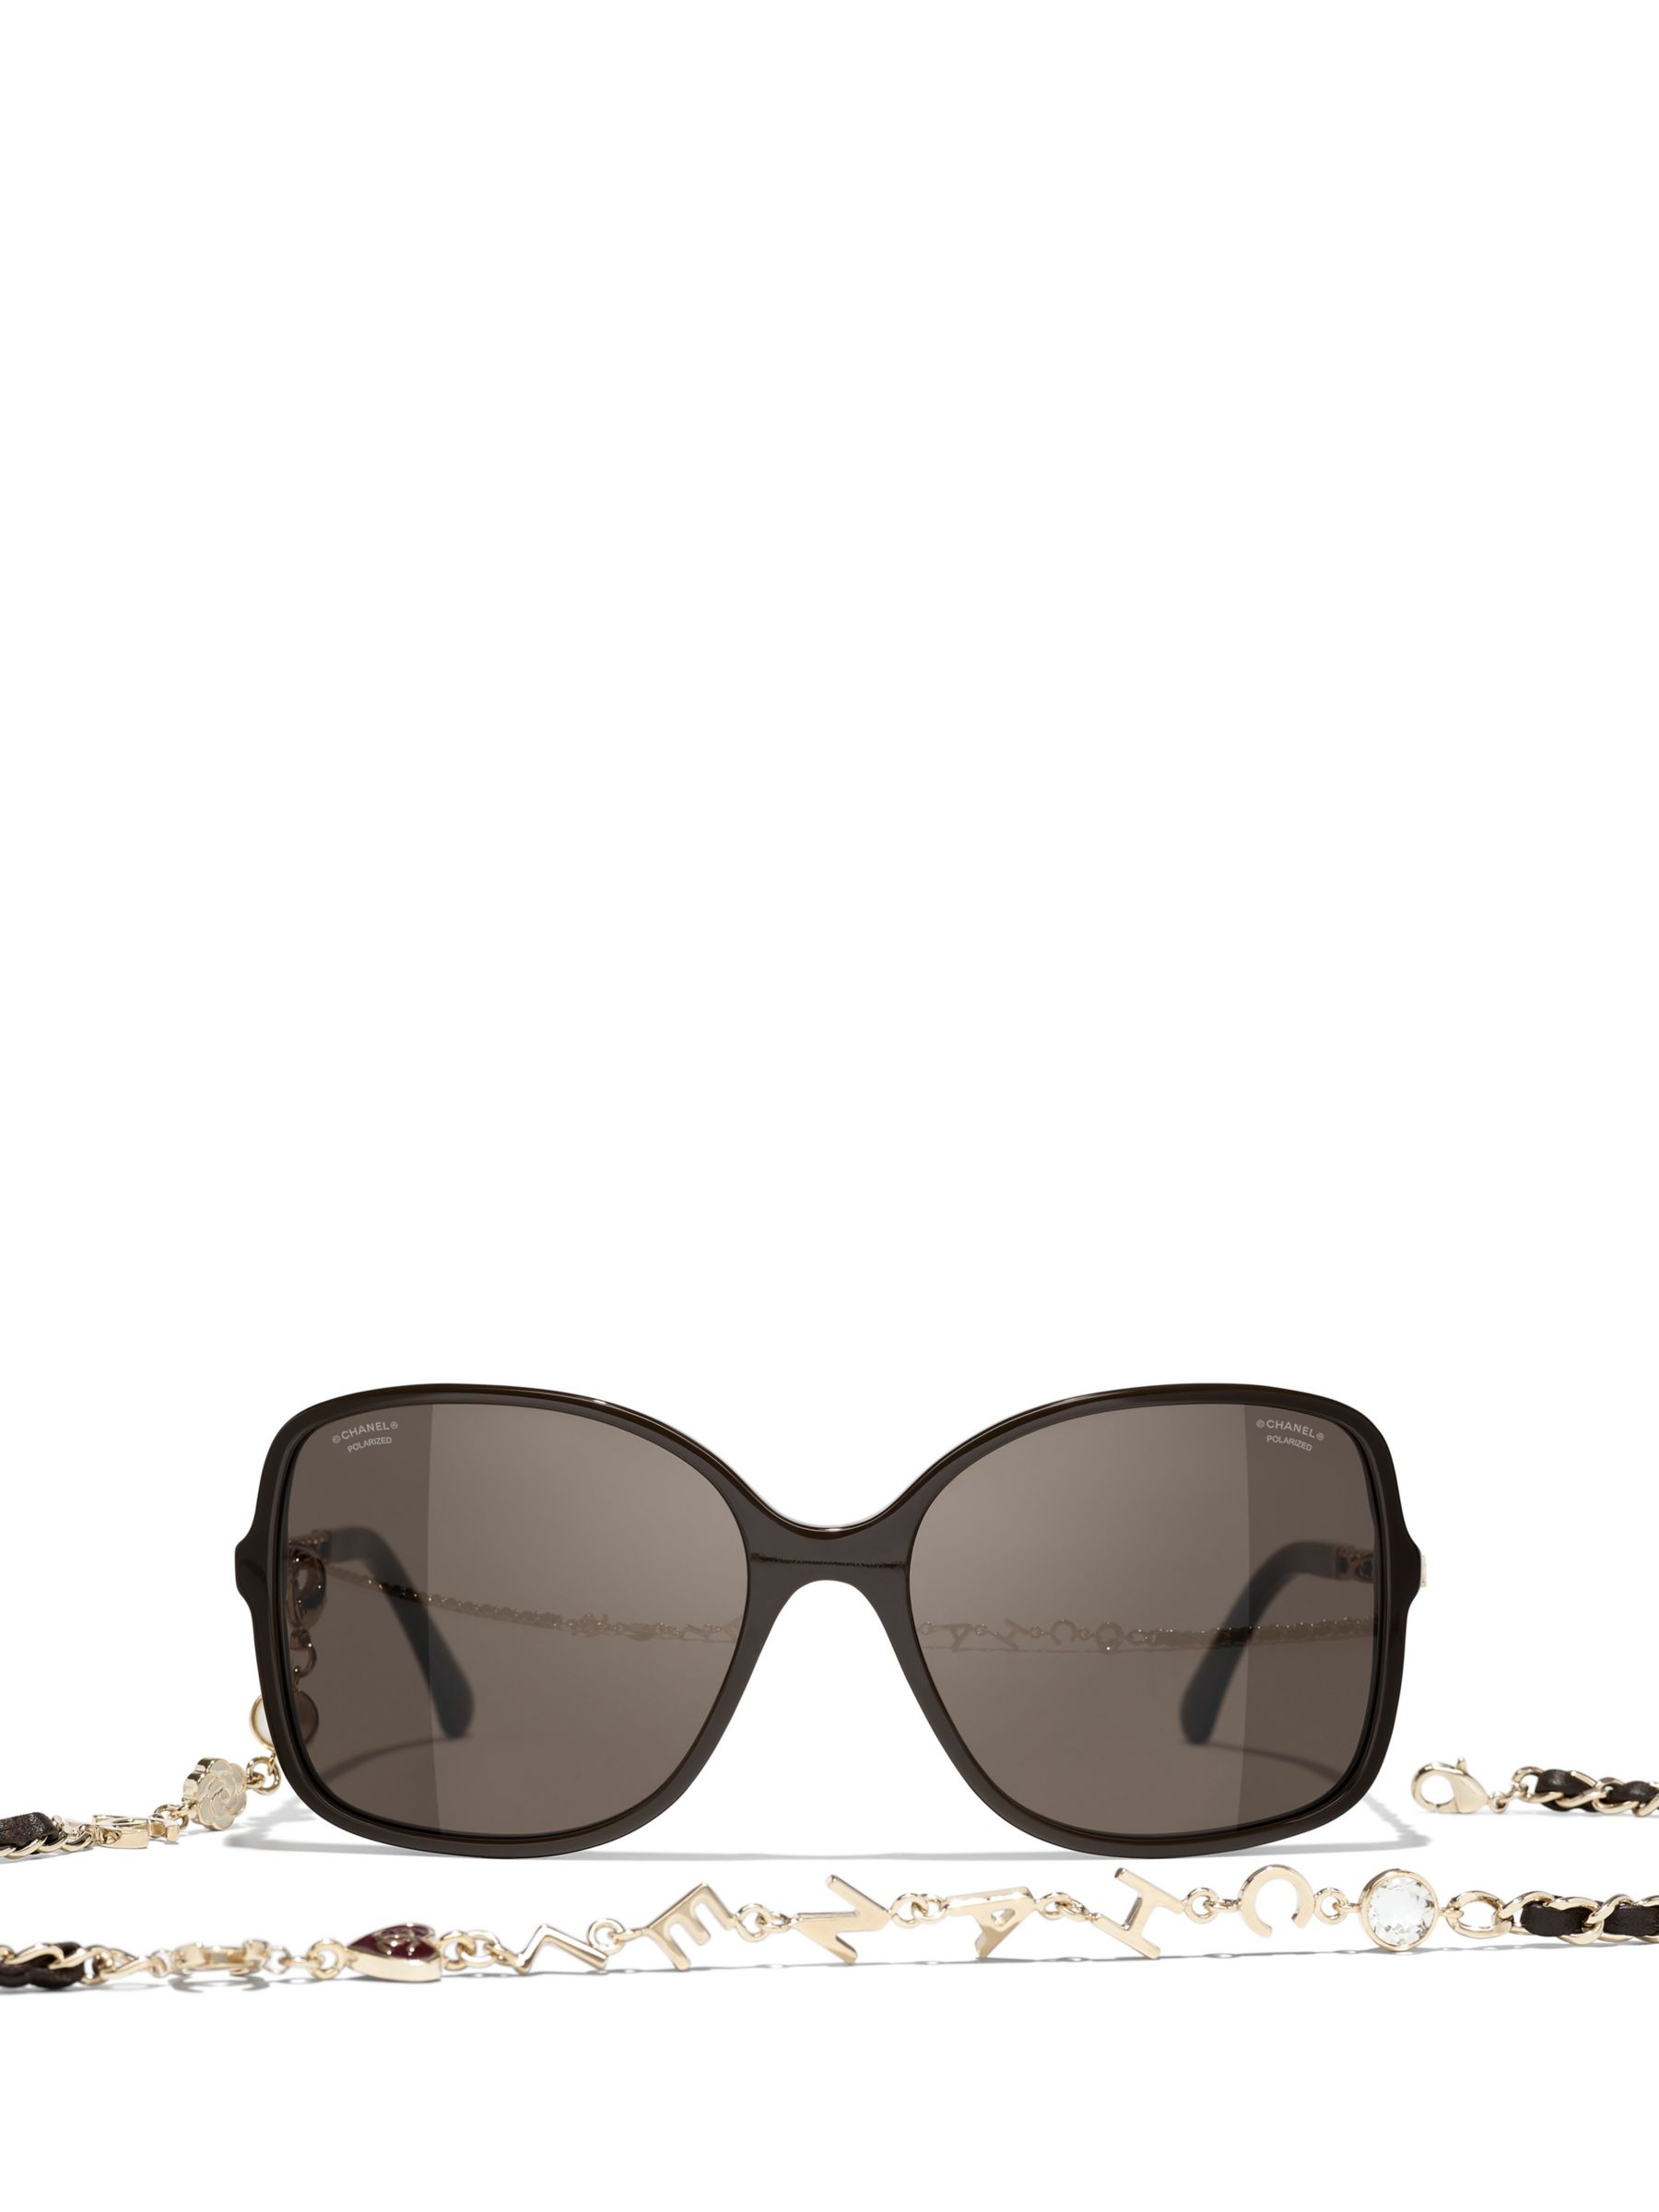 CHANEL Square Sunglasses CH5210Q Brown at John Lewis & Partners